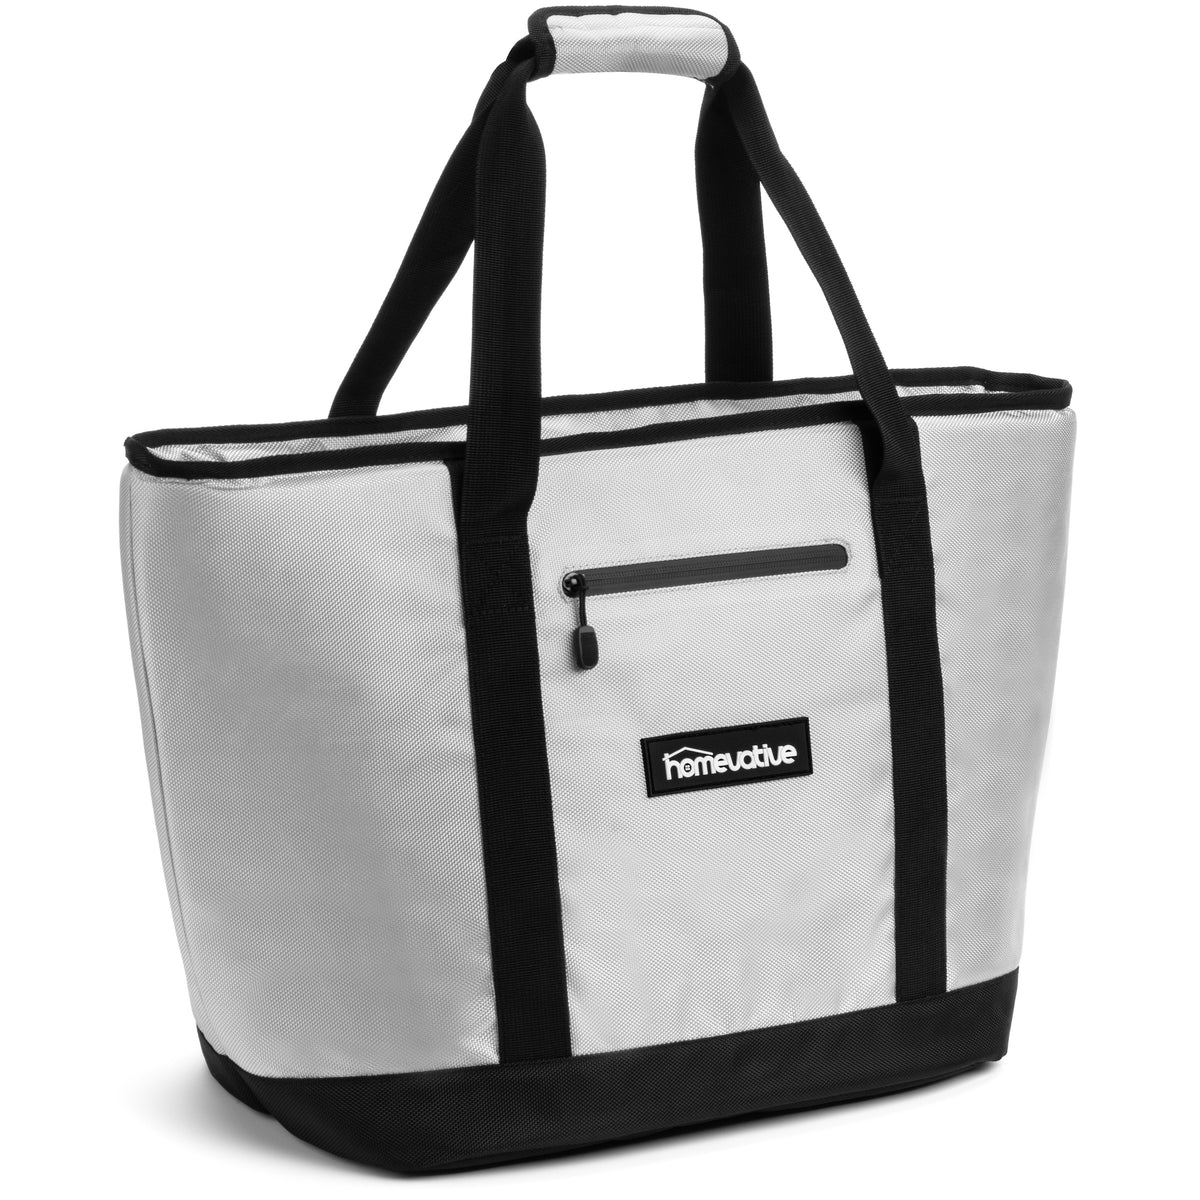 OtterBox Tote Cooler Grey Stone